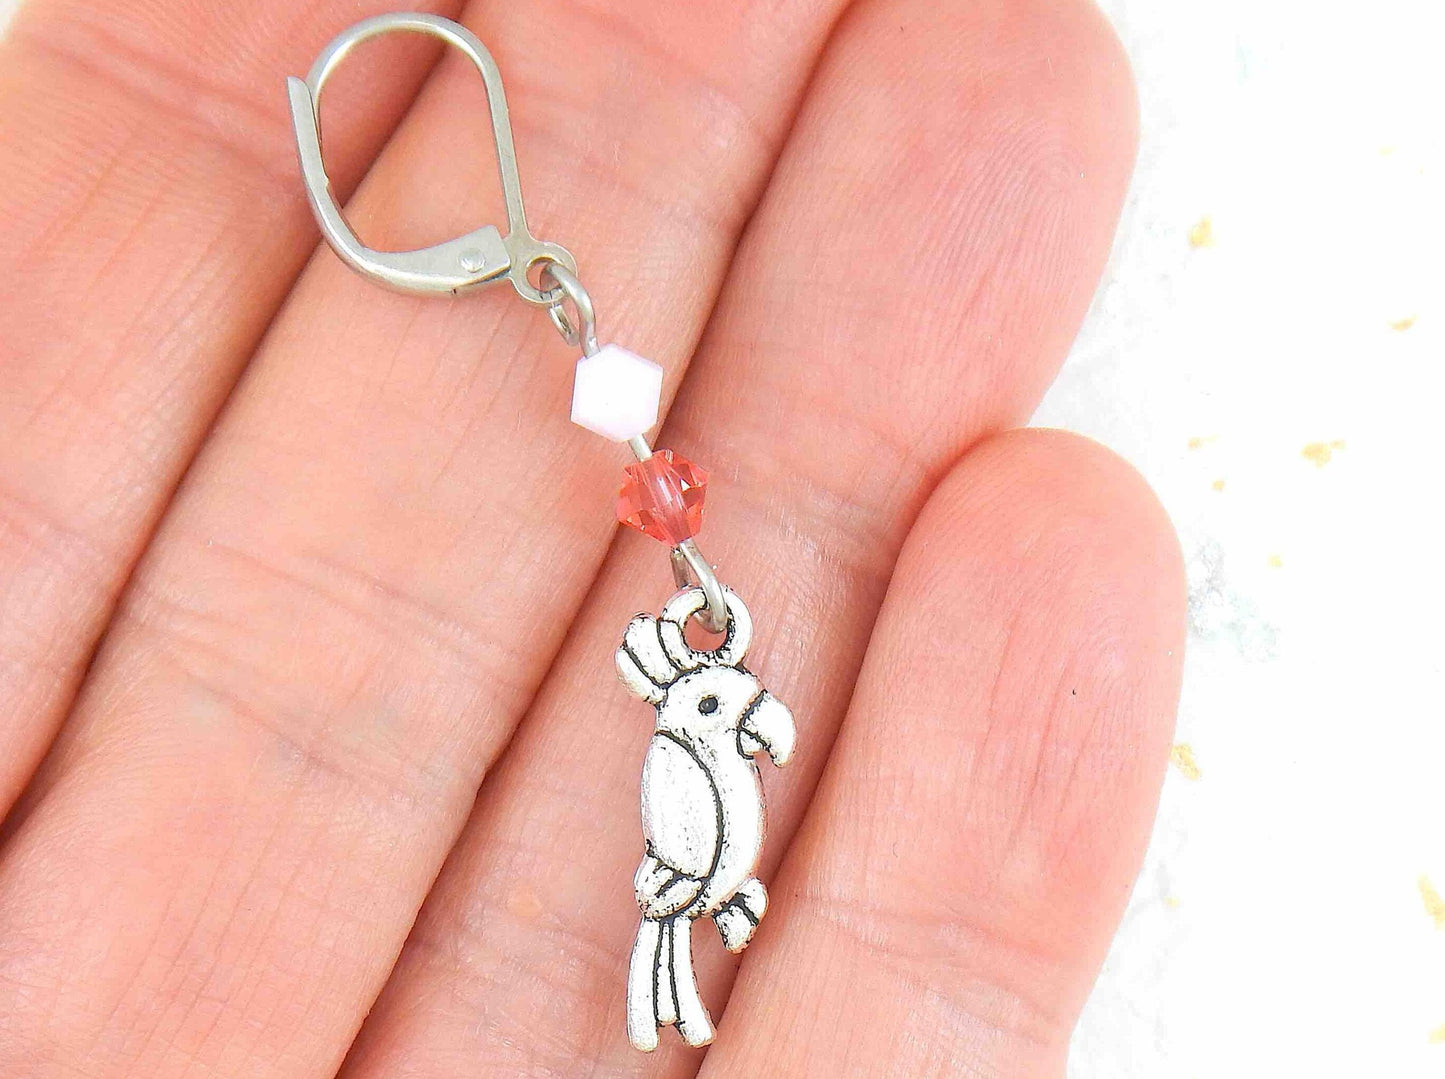 Long earrings with small pewter cockatoos (parrots) and Swarovski crystals, stainless steel lever back hooks